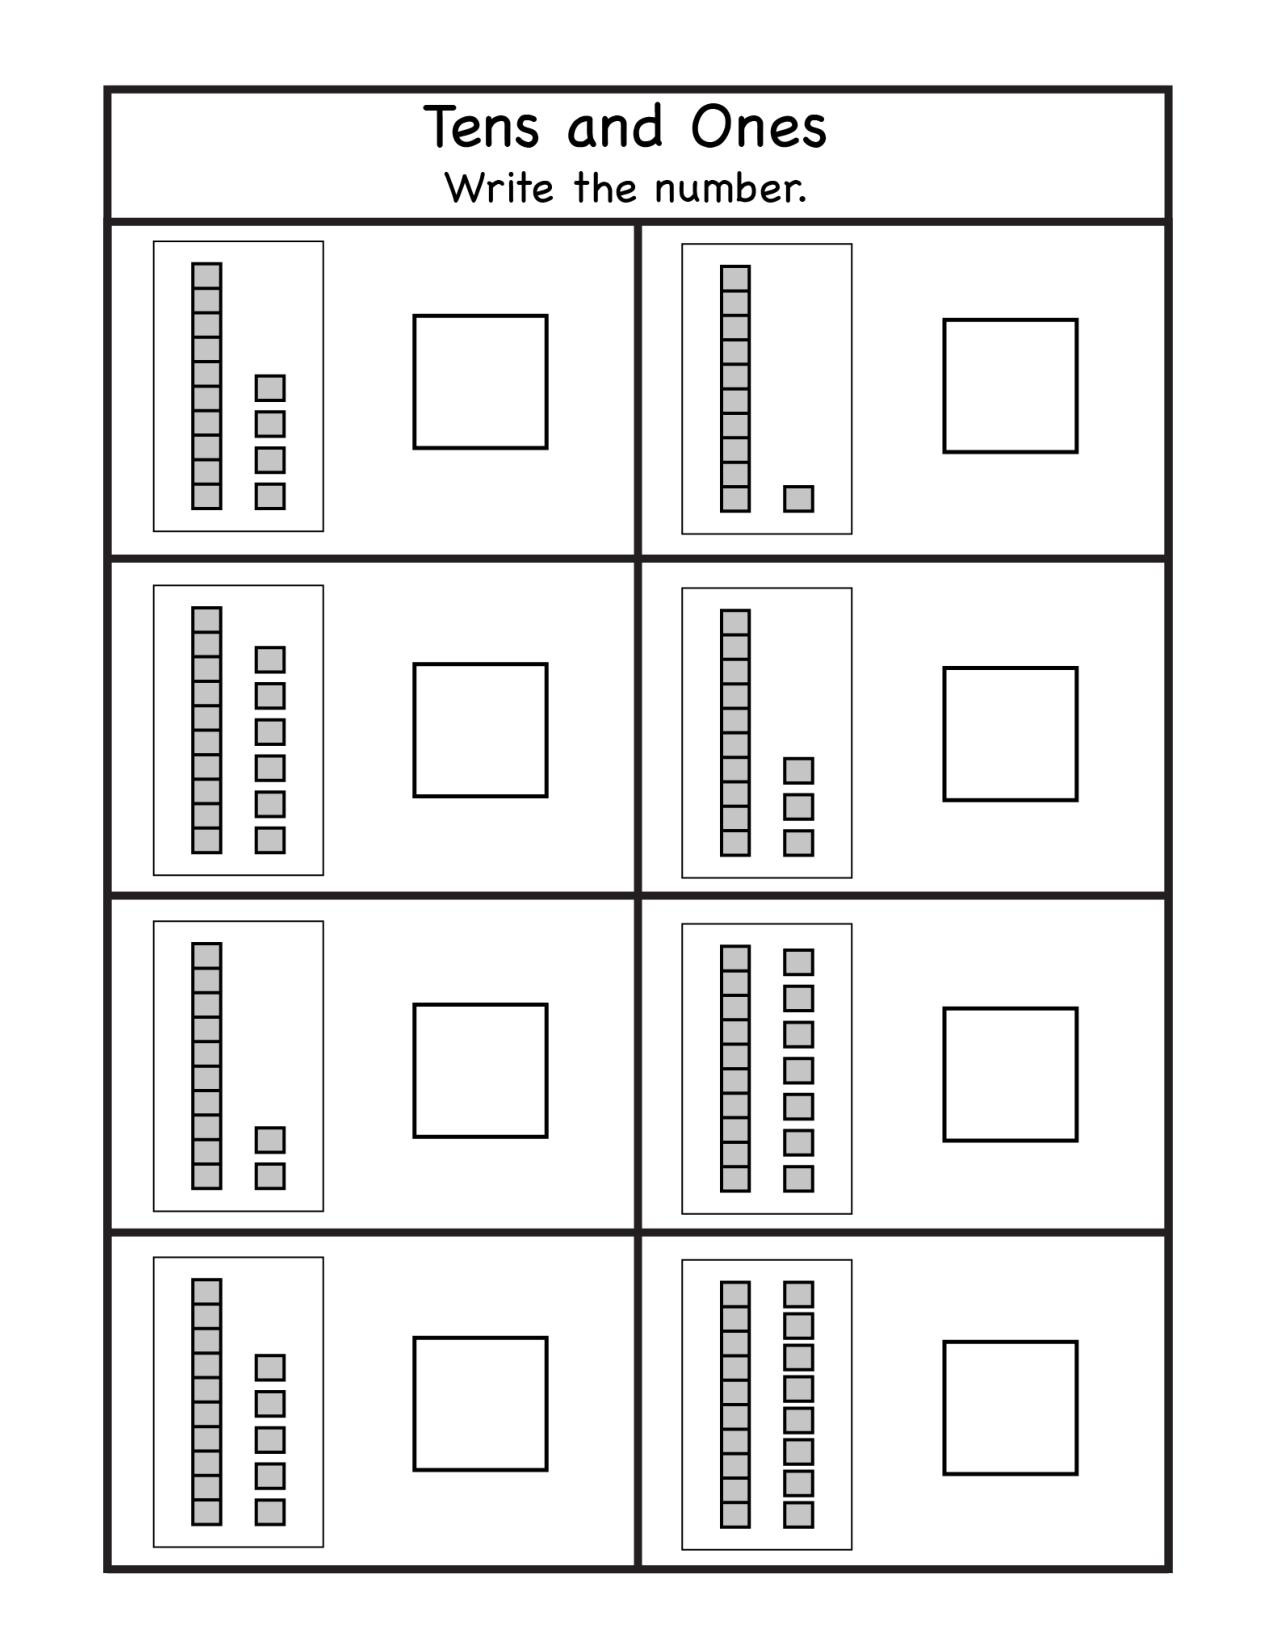 Tens and Ones Worksheets Kindergarten Place Value Archives